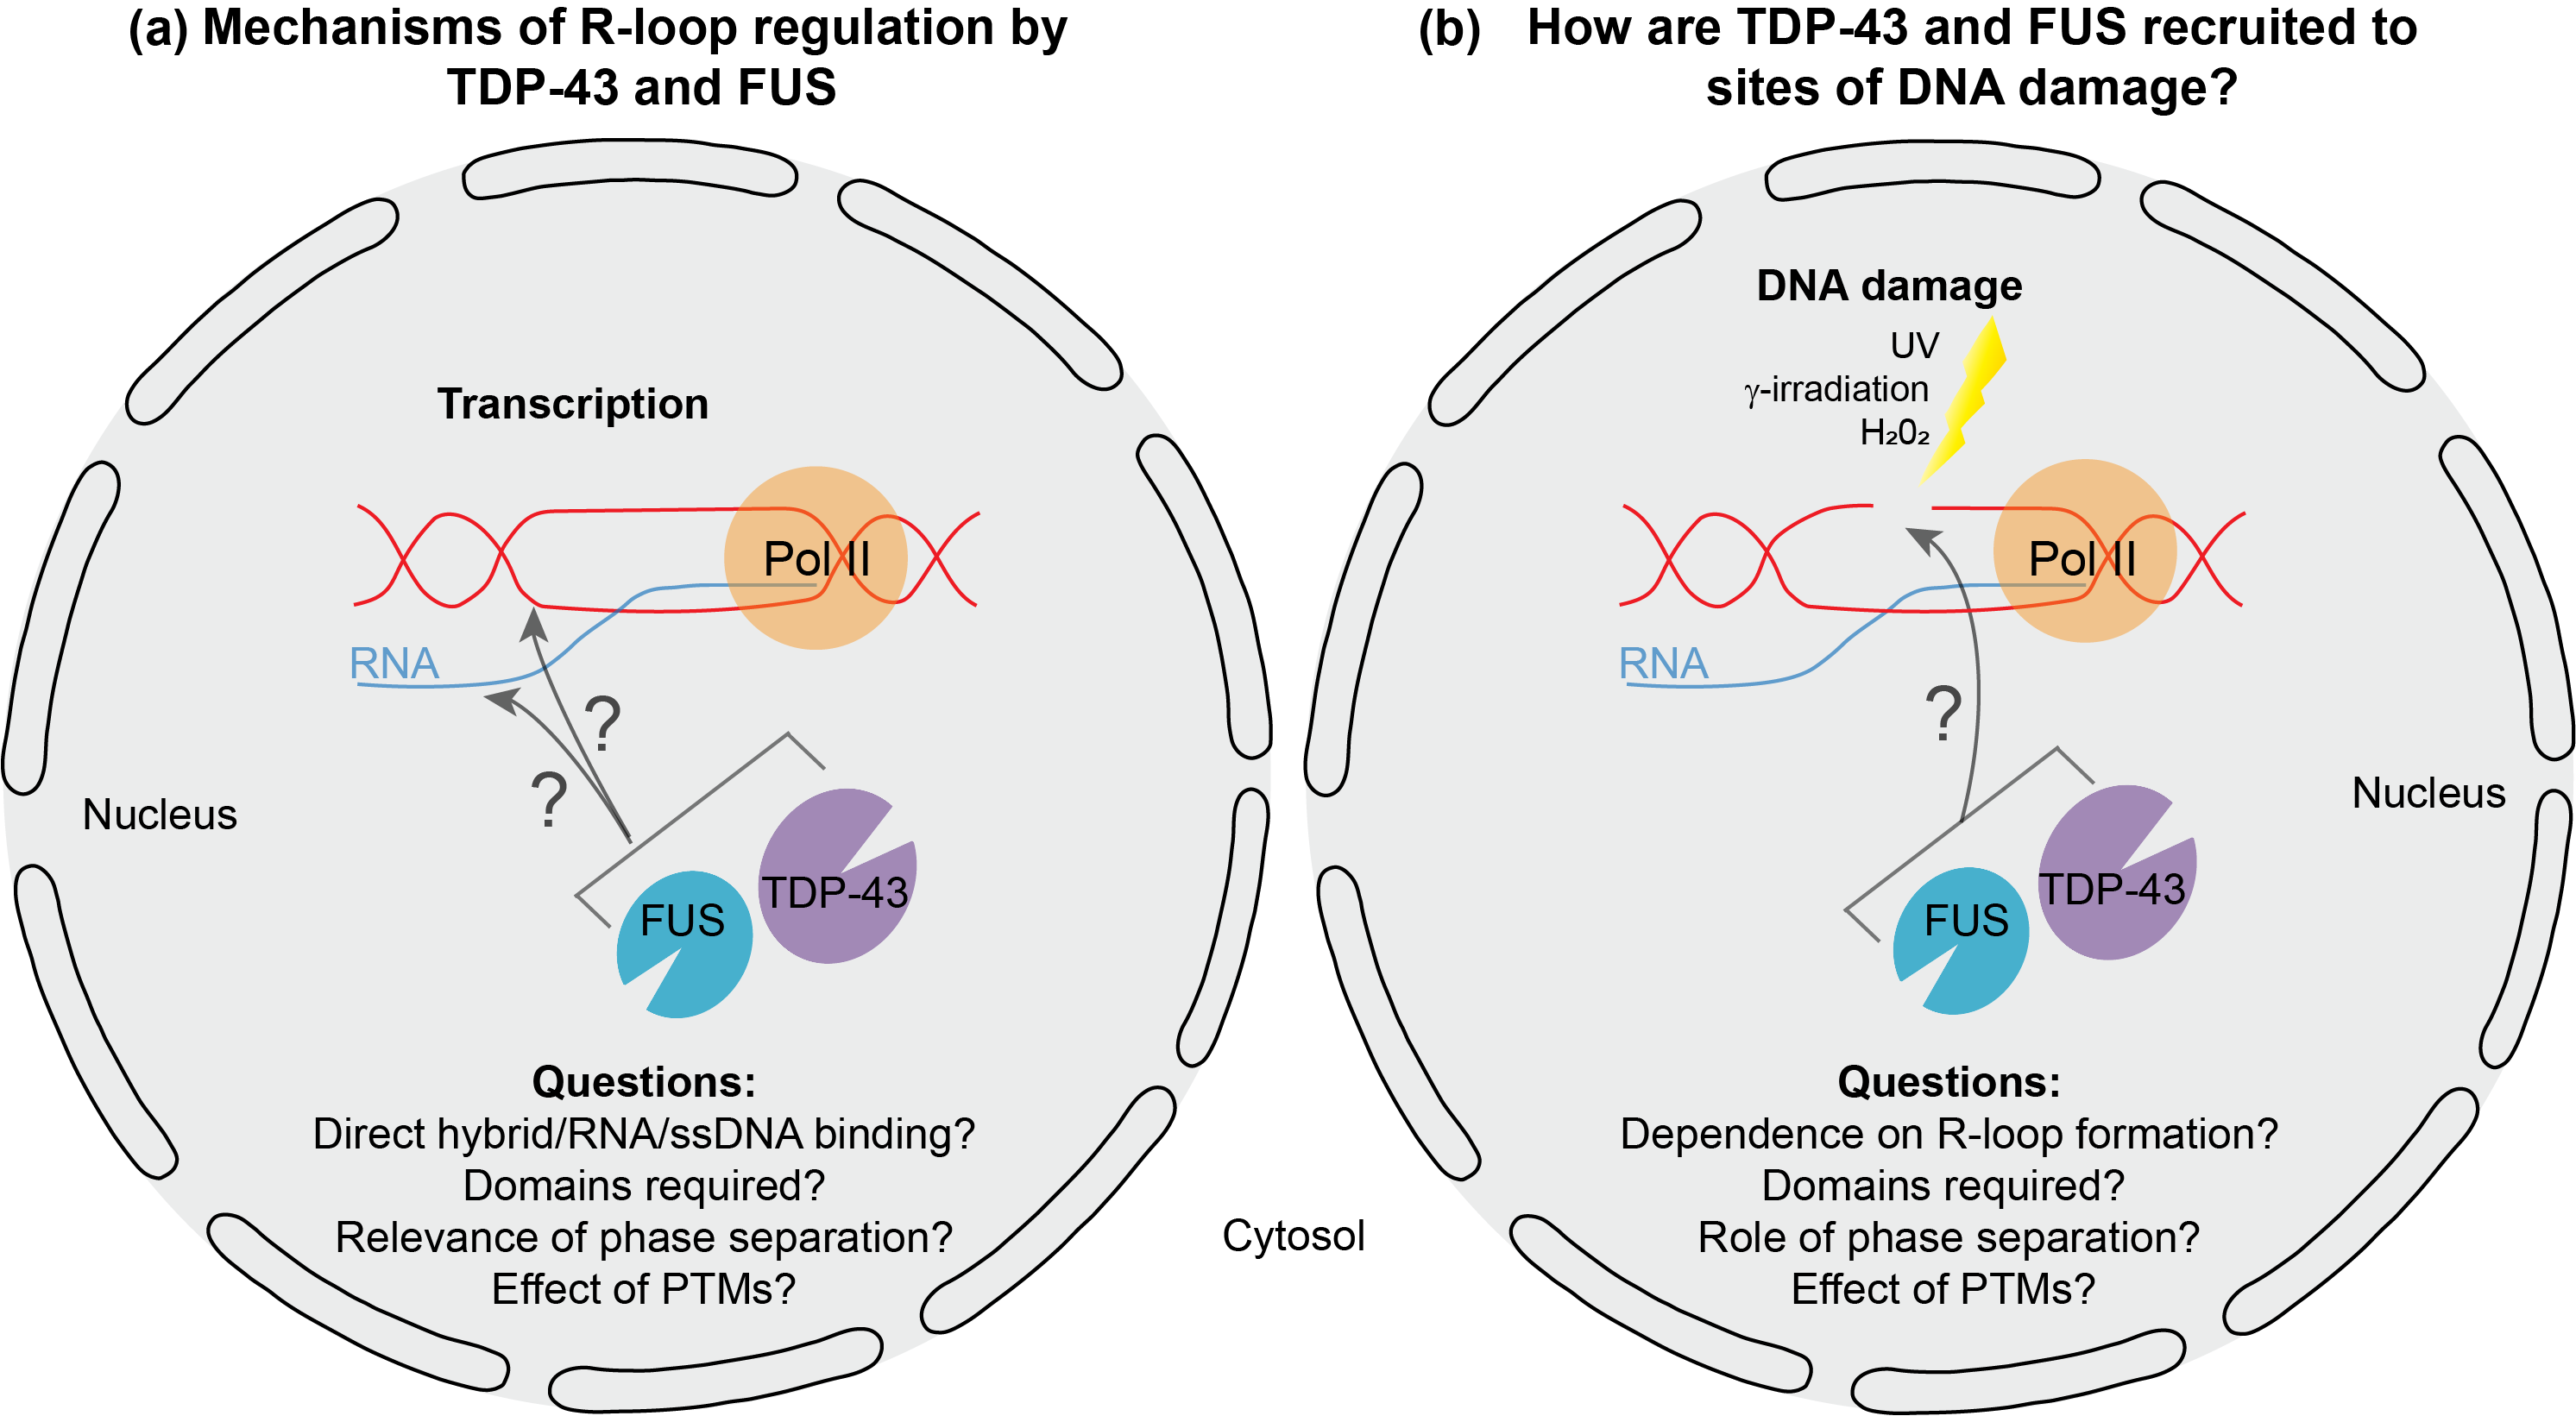 Project 6. R-loop regulation by neurodegeneration-linked DNA/RNA-binding proteins FUS and TDP-43.